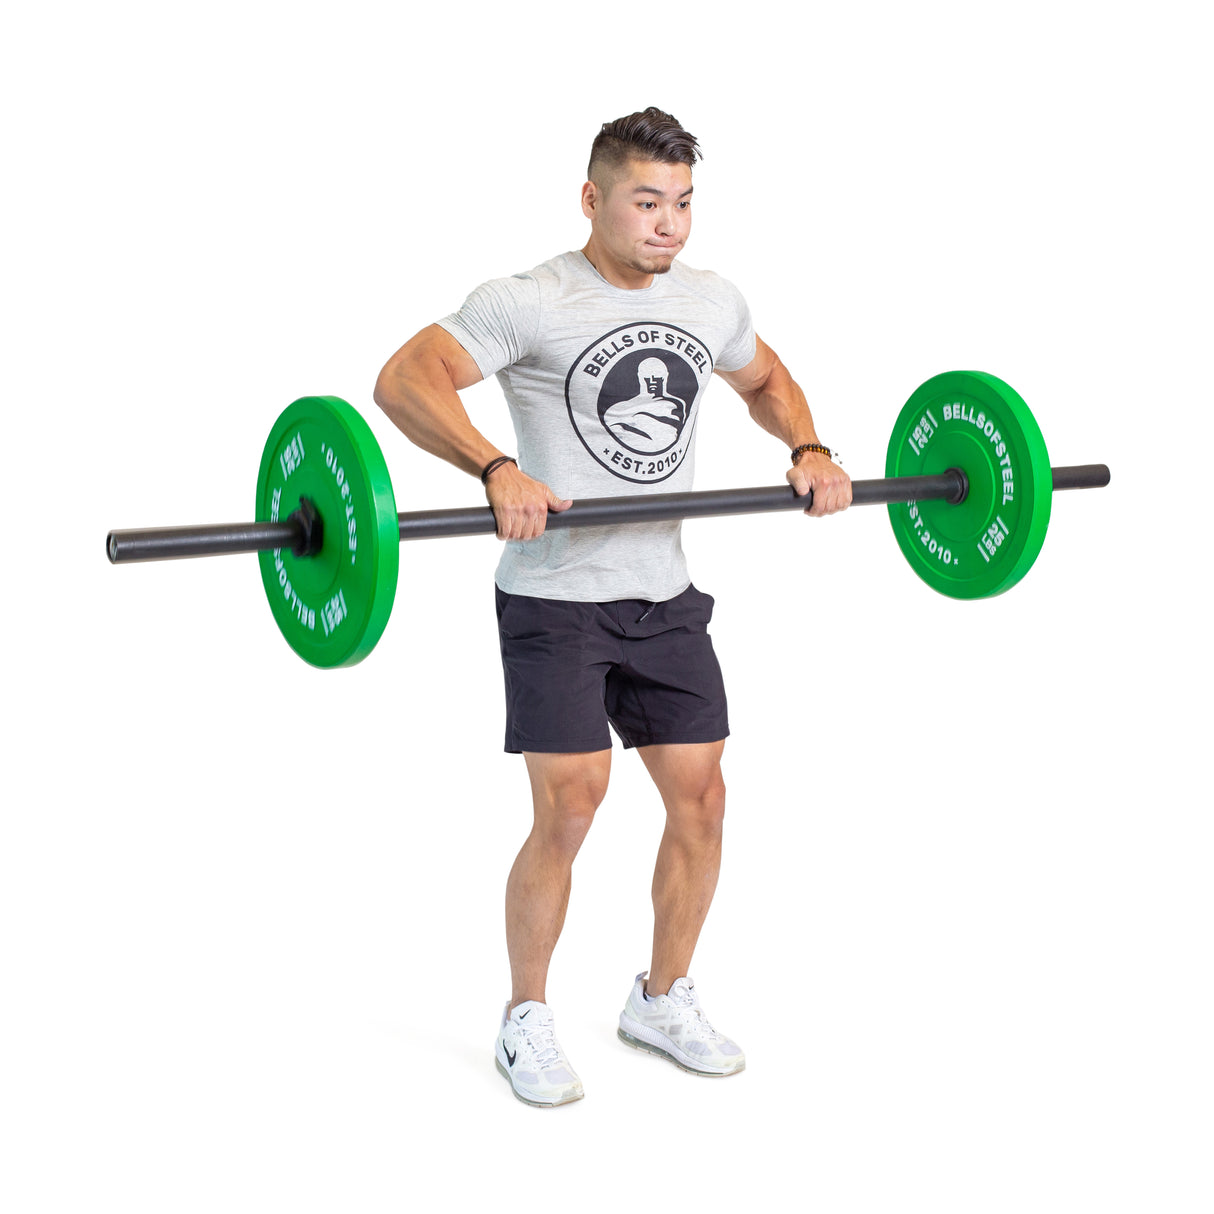 Male athlete lifting barbell workout using standard axel bar